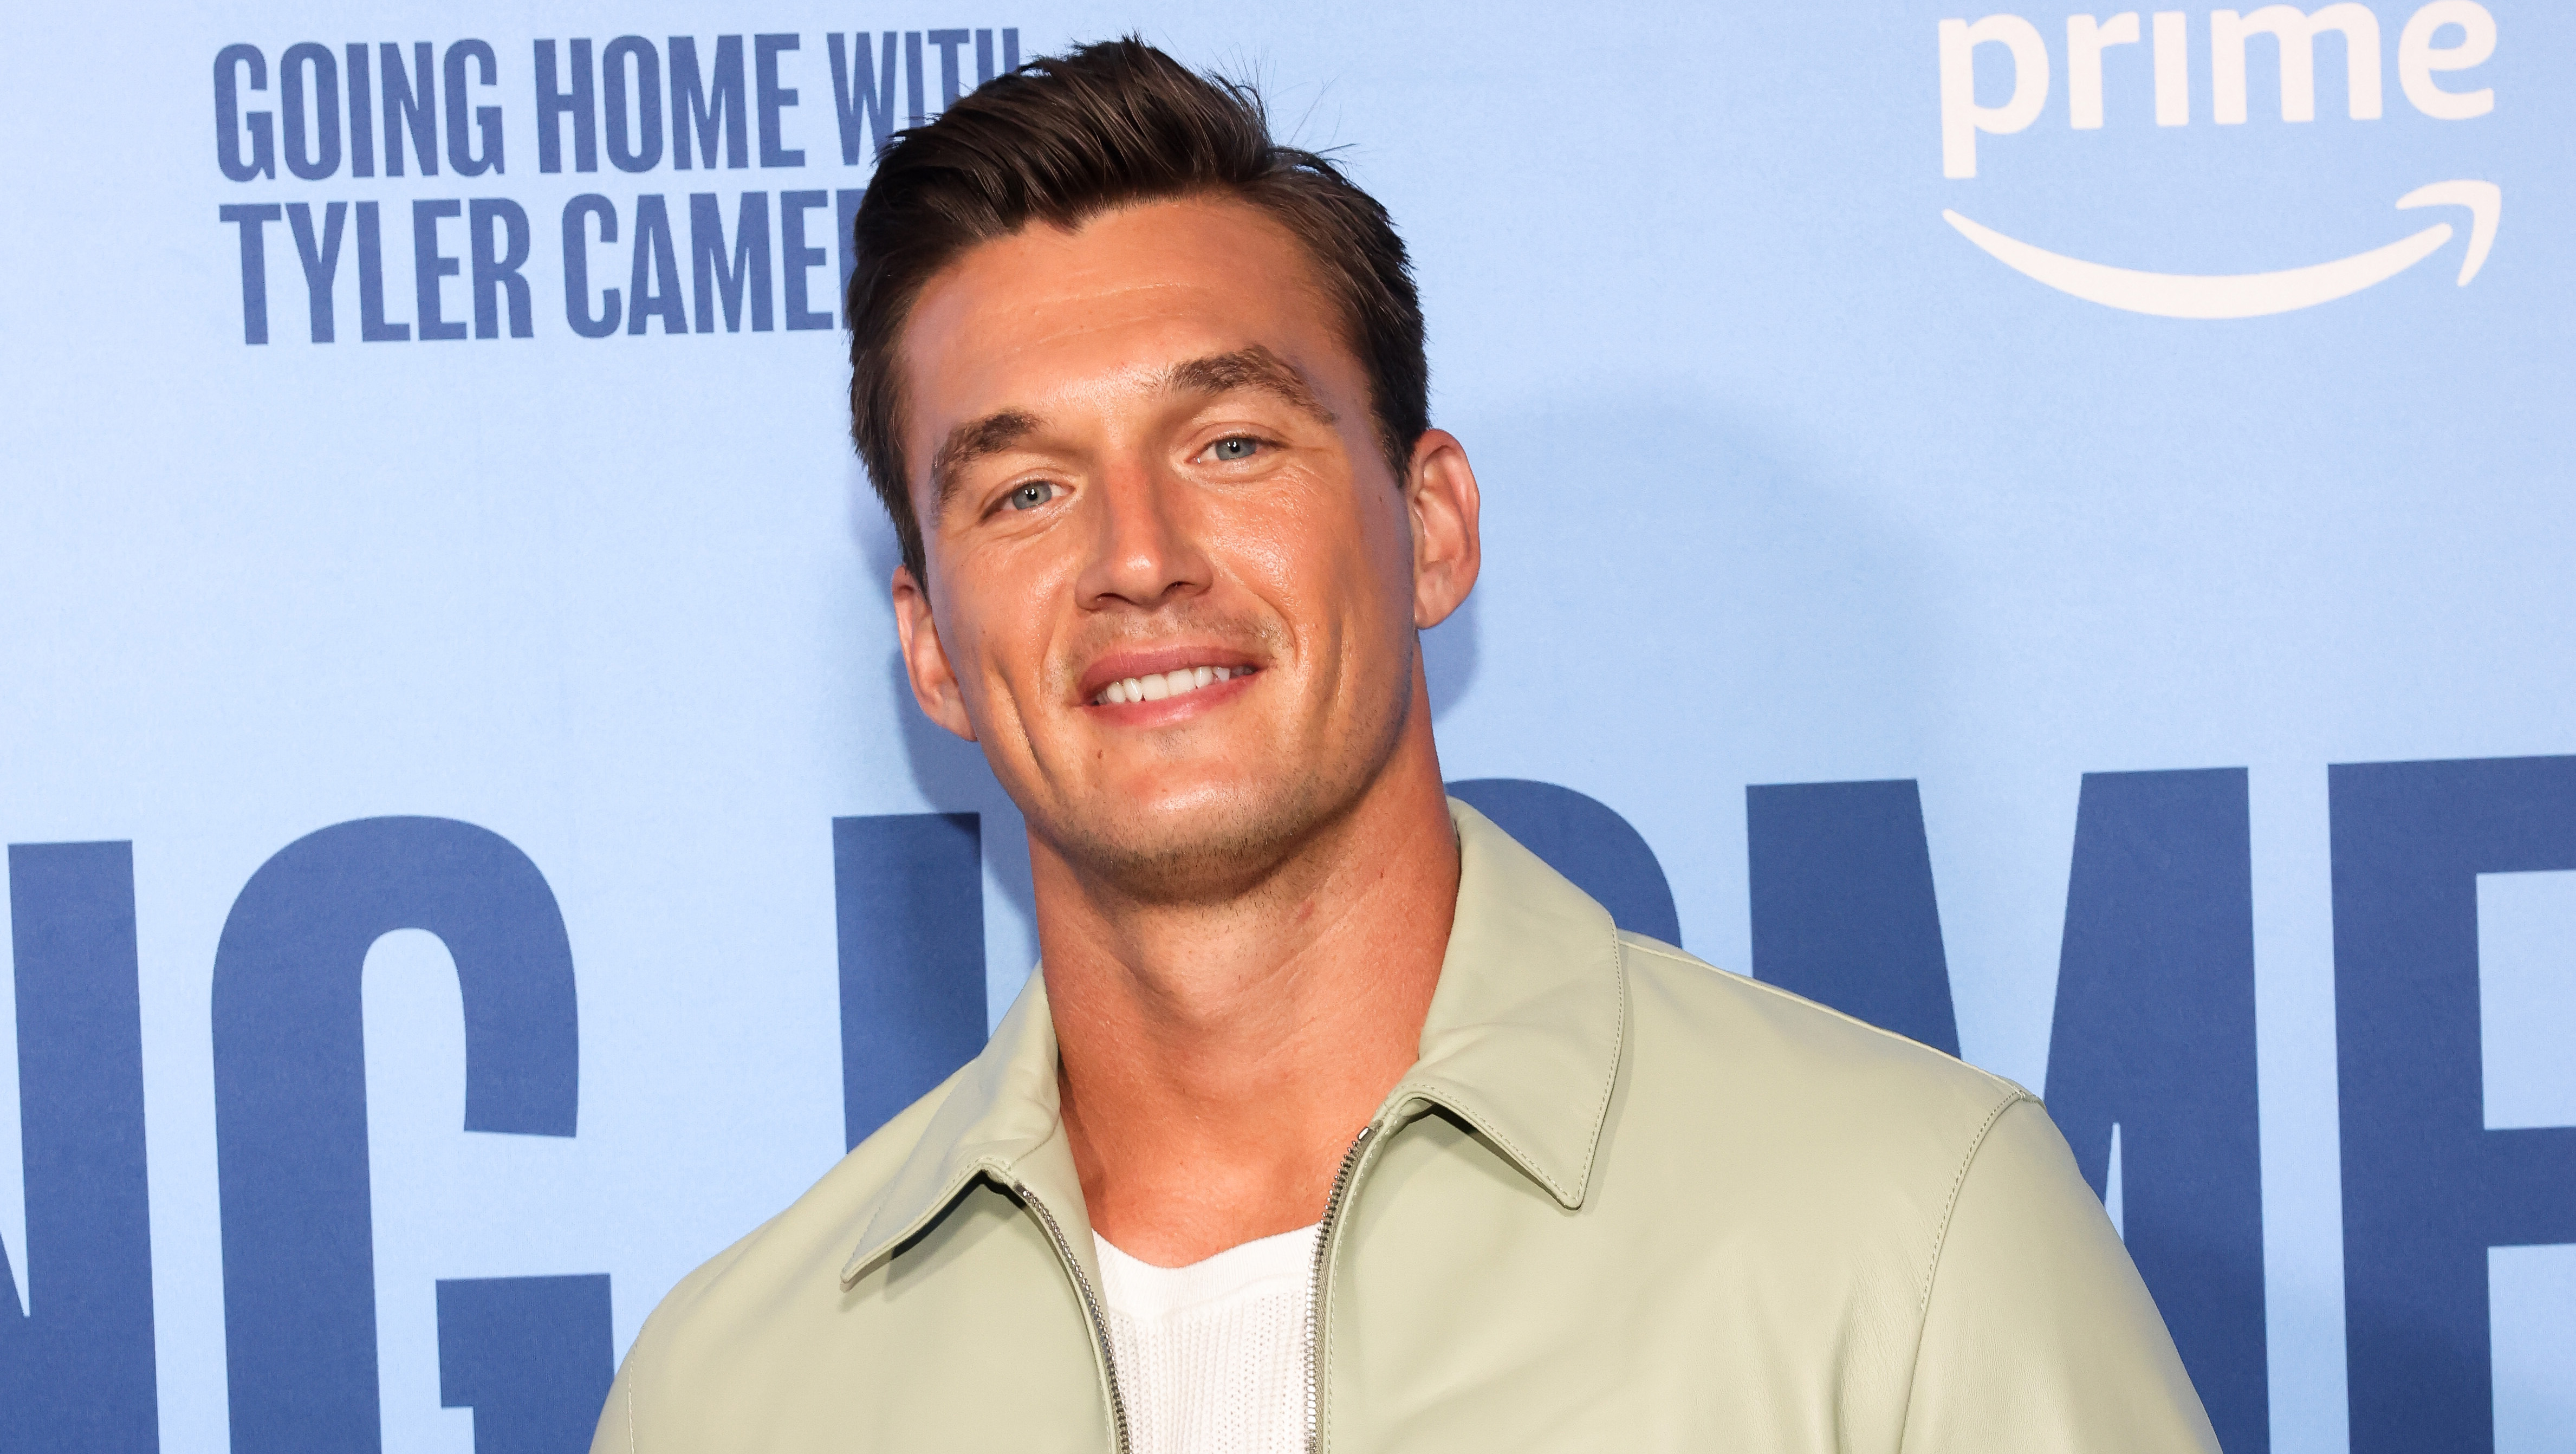 Tyler Cameron Says Gerry Turner and Theresa Nist’s Divorce ‘Put a Stain’ on Bachelor Nation